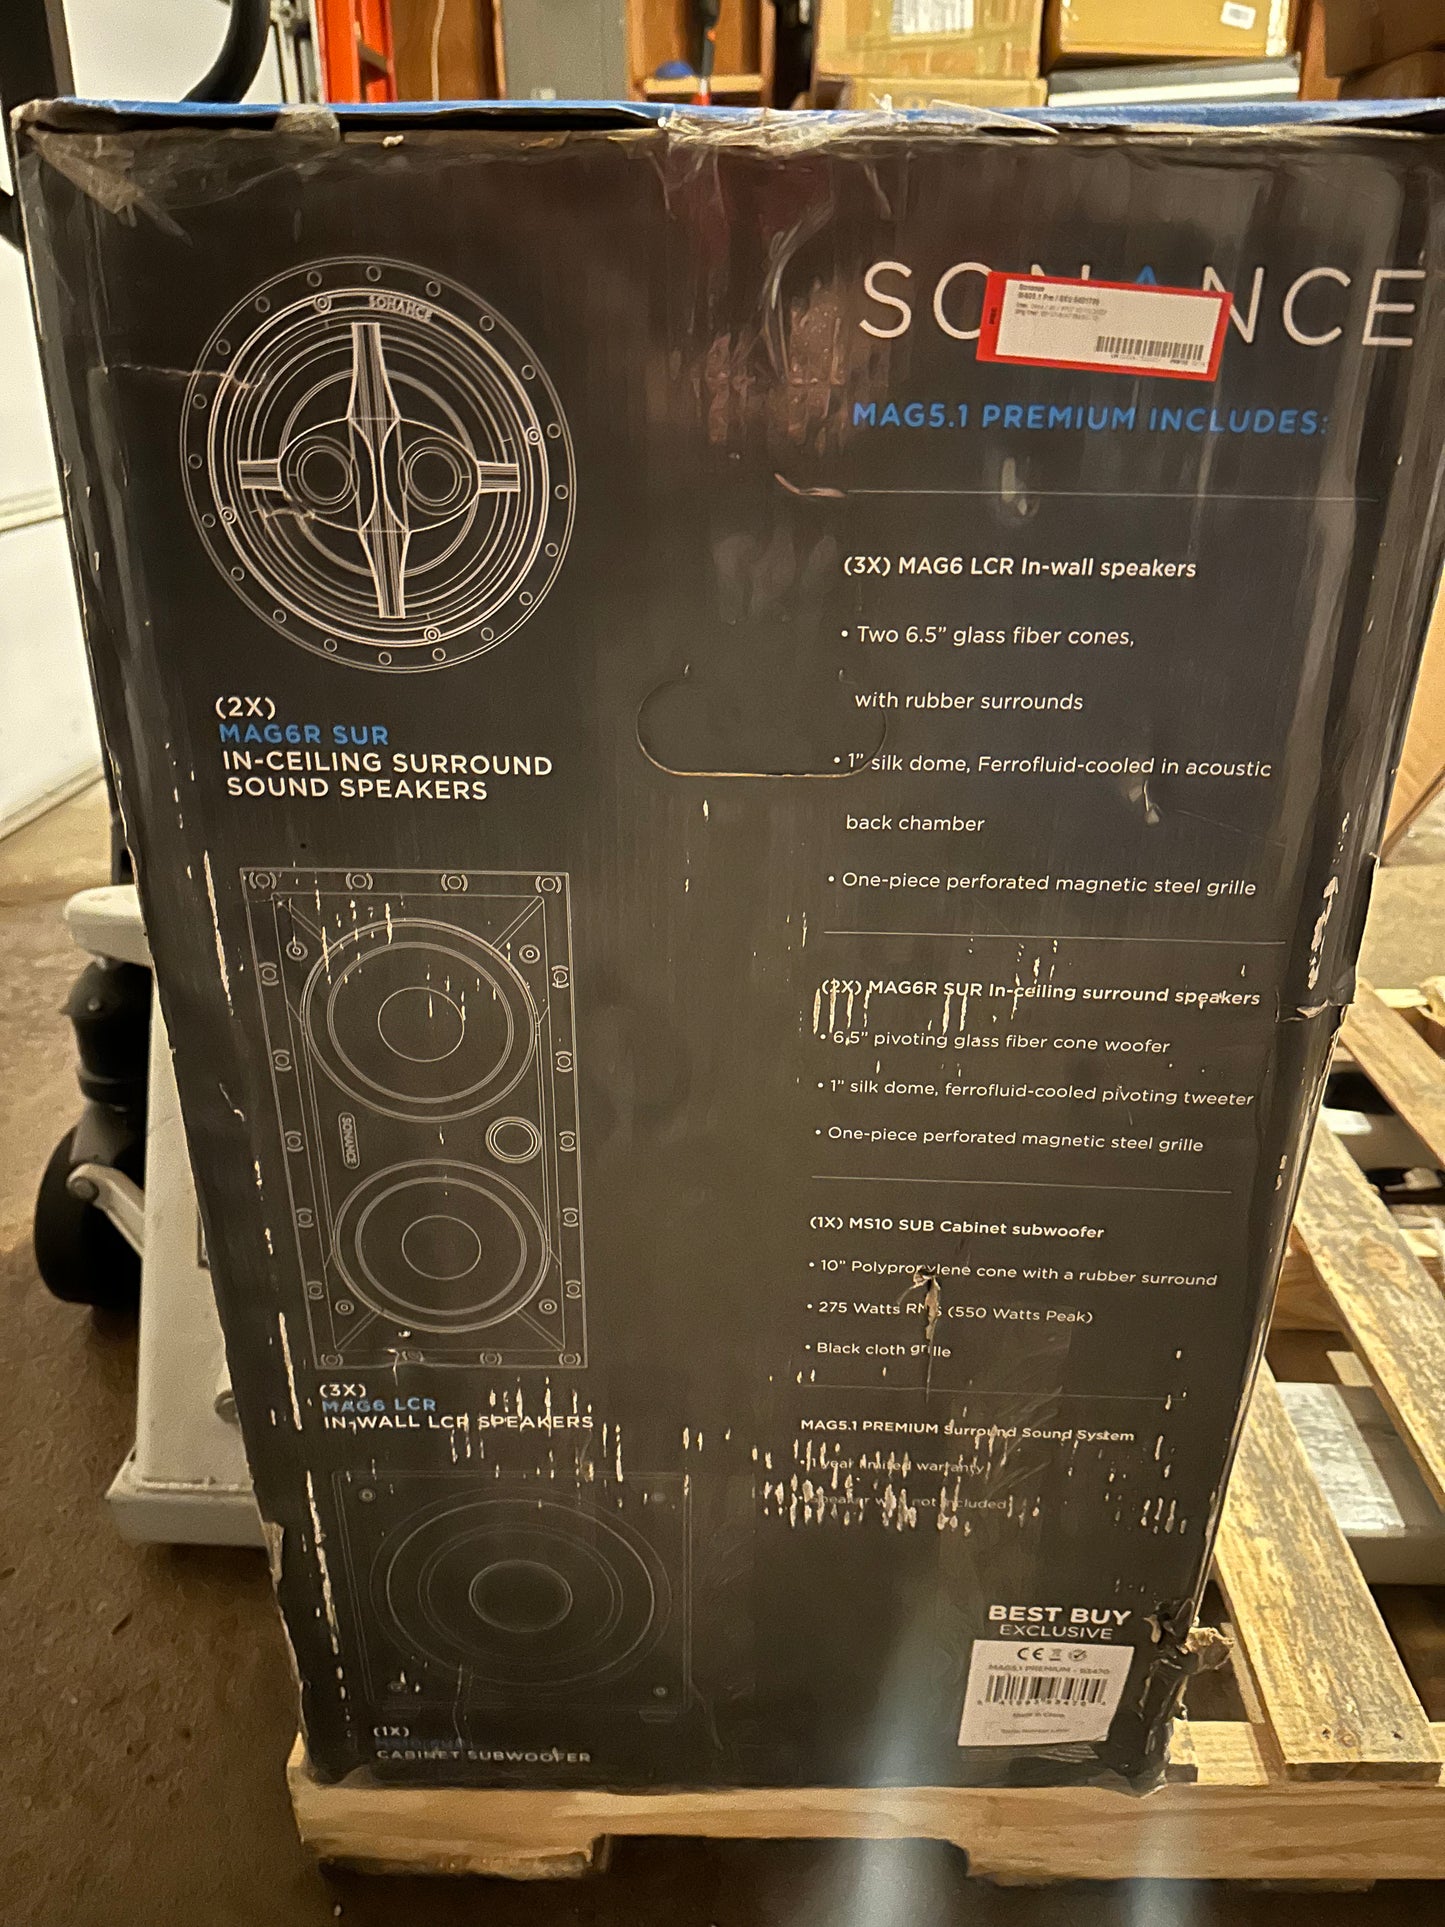 Sonance MAG5.1 Premium Speaker System for Home Theater 5.1-channel